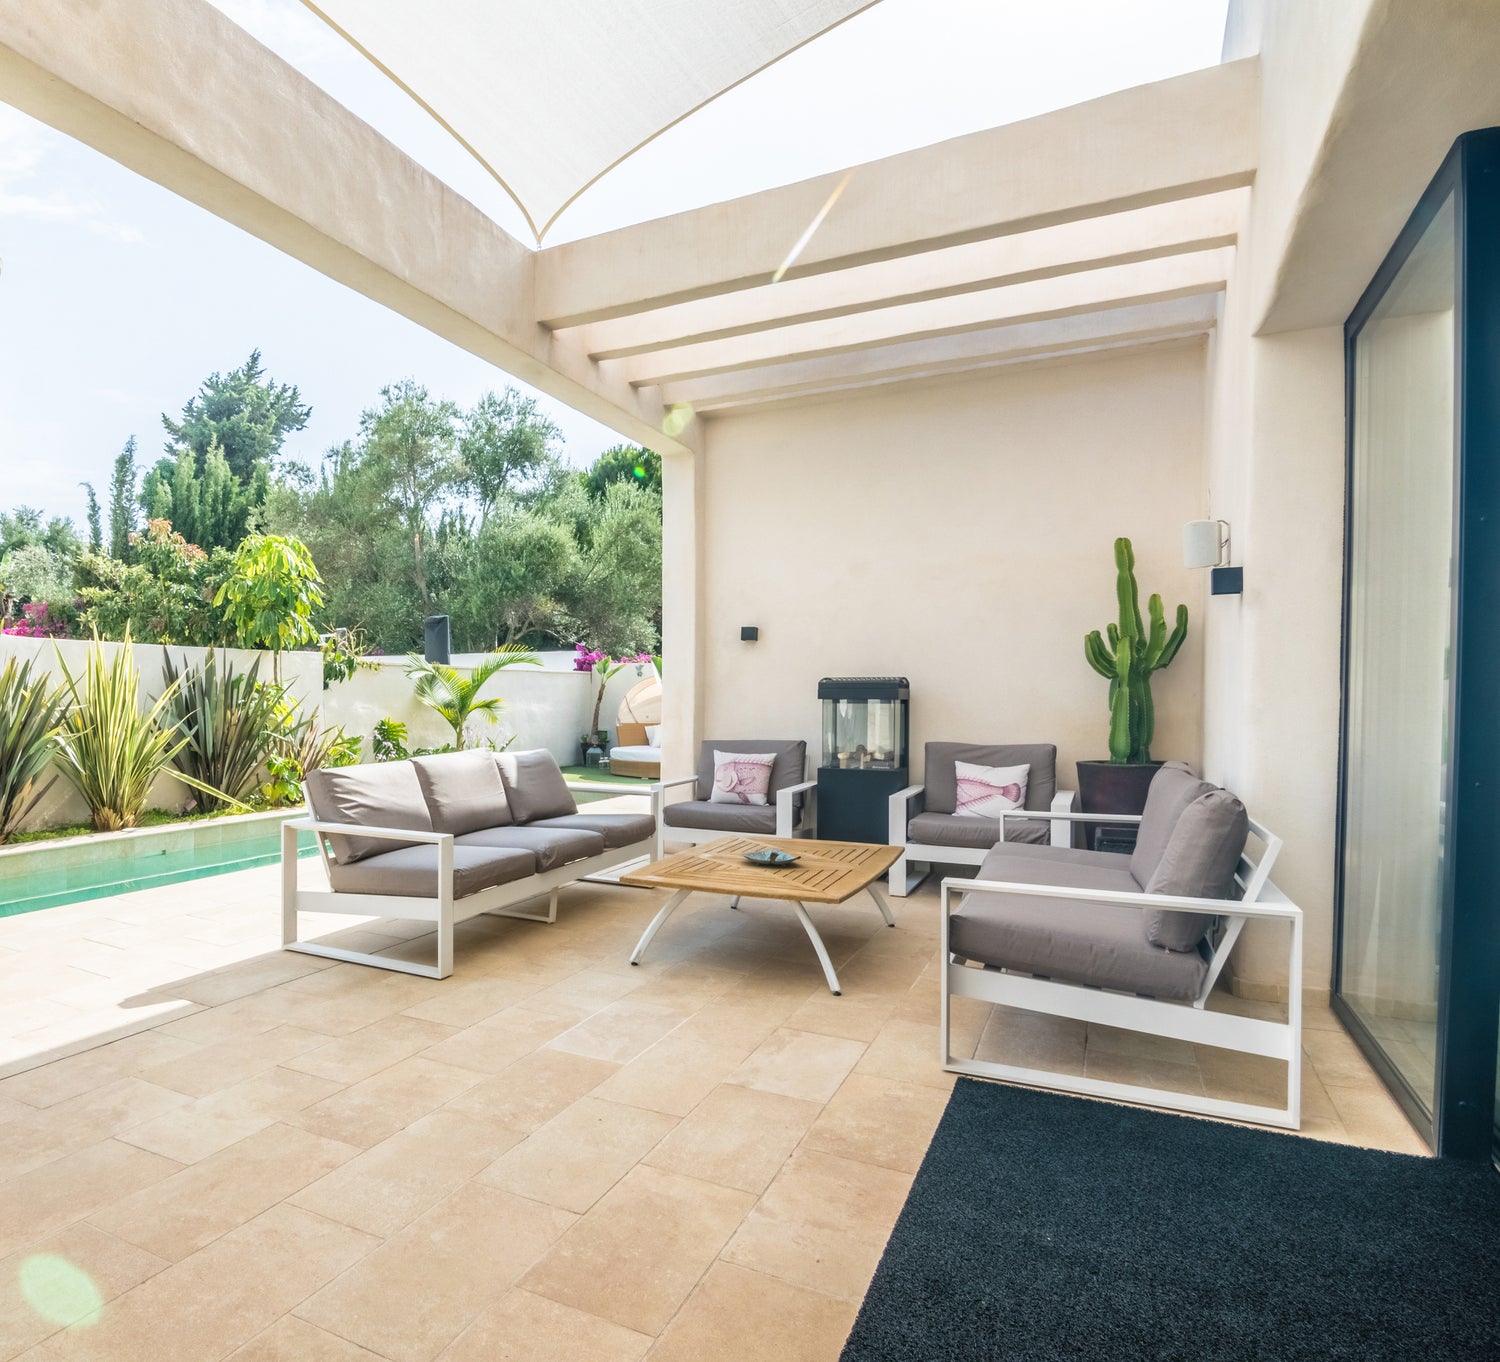 Terrace area of Villa, Marbella luxury Beach House short term rental, located on the beach side at Marbella´s exclusive Golden Mile just by beach